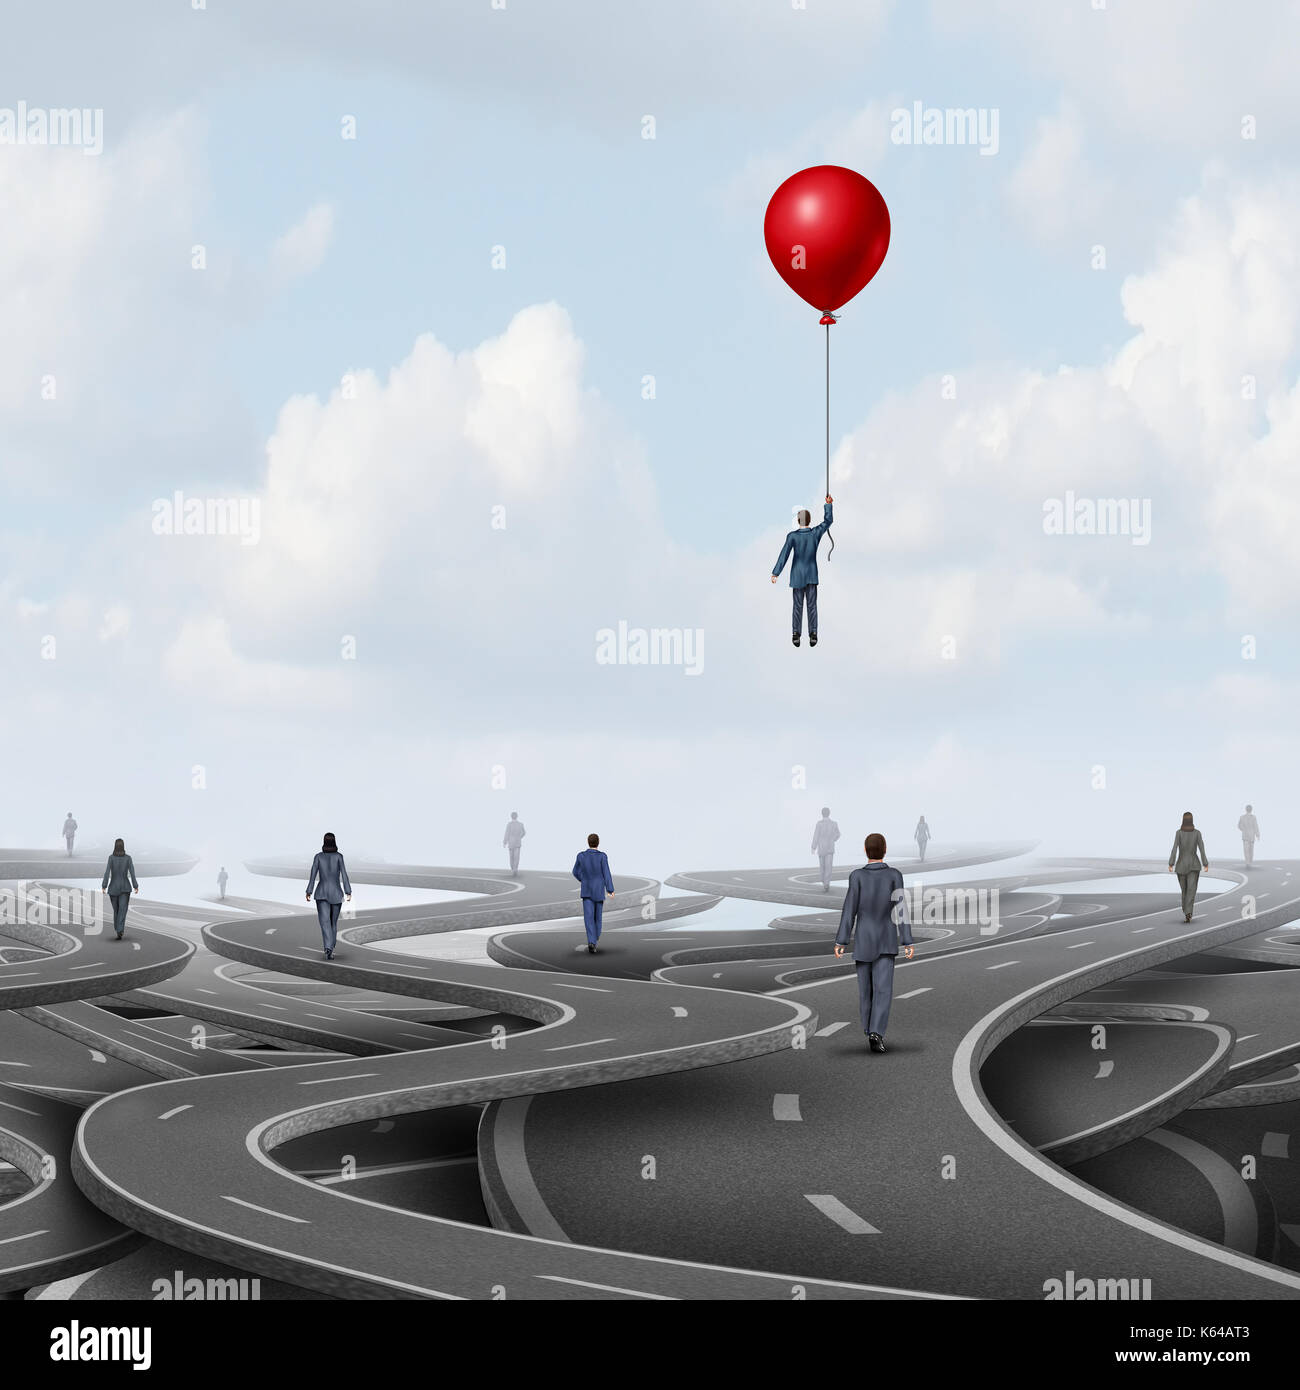 Concept of business leadership as people on a road walking on pathways as a symbol for new strategic thinking with 3D illustration elements. Stock Photo